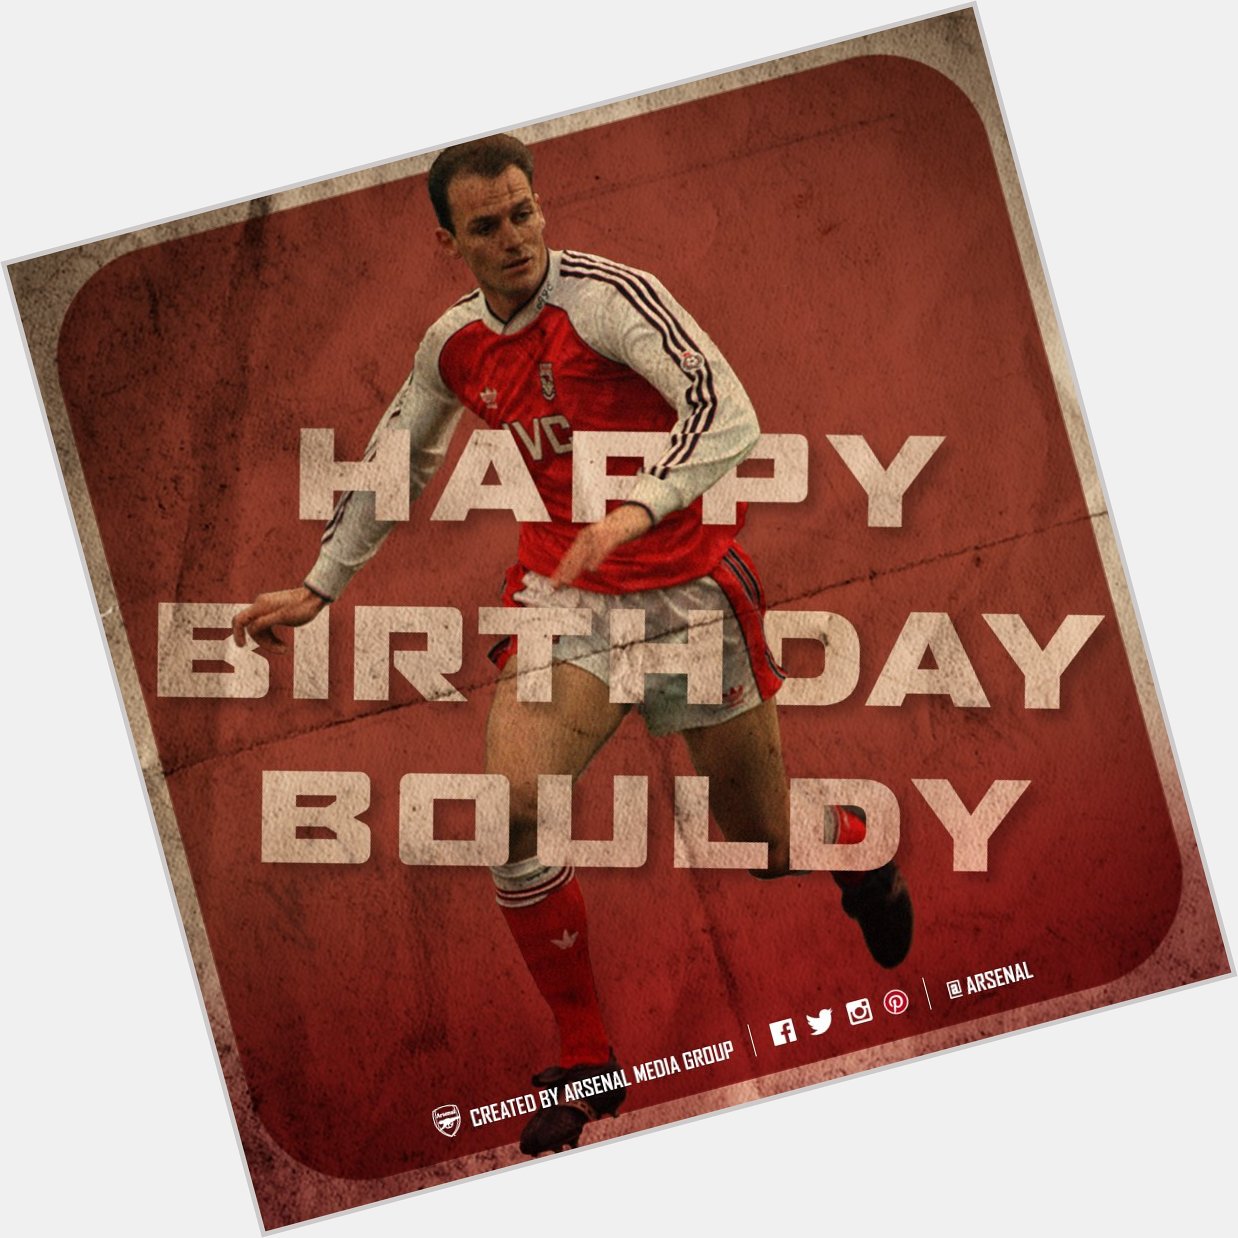 Morning all. We start the day by wishing a very happy birthday to legend and assistant manager Steve Bould 